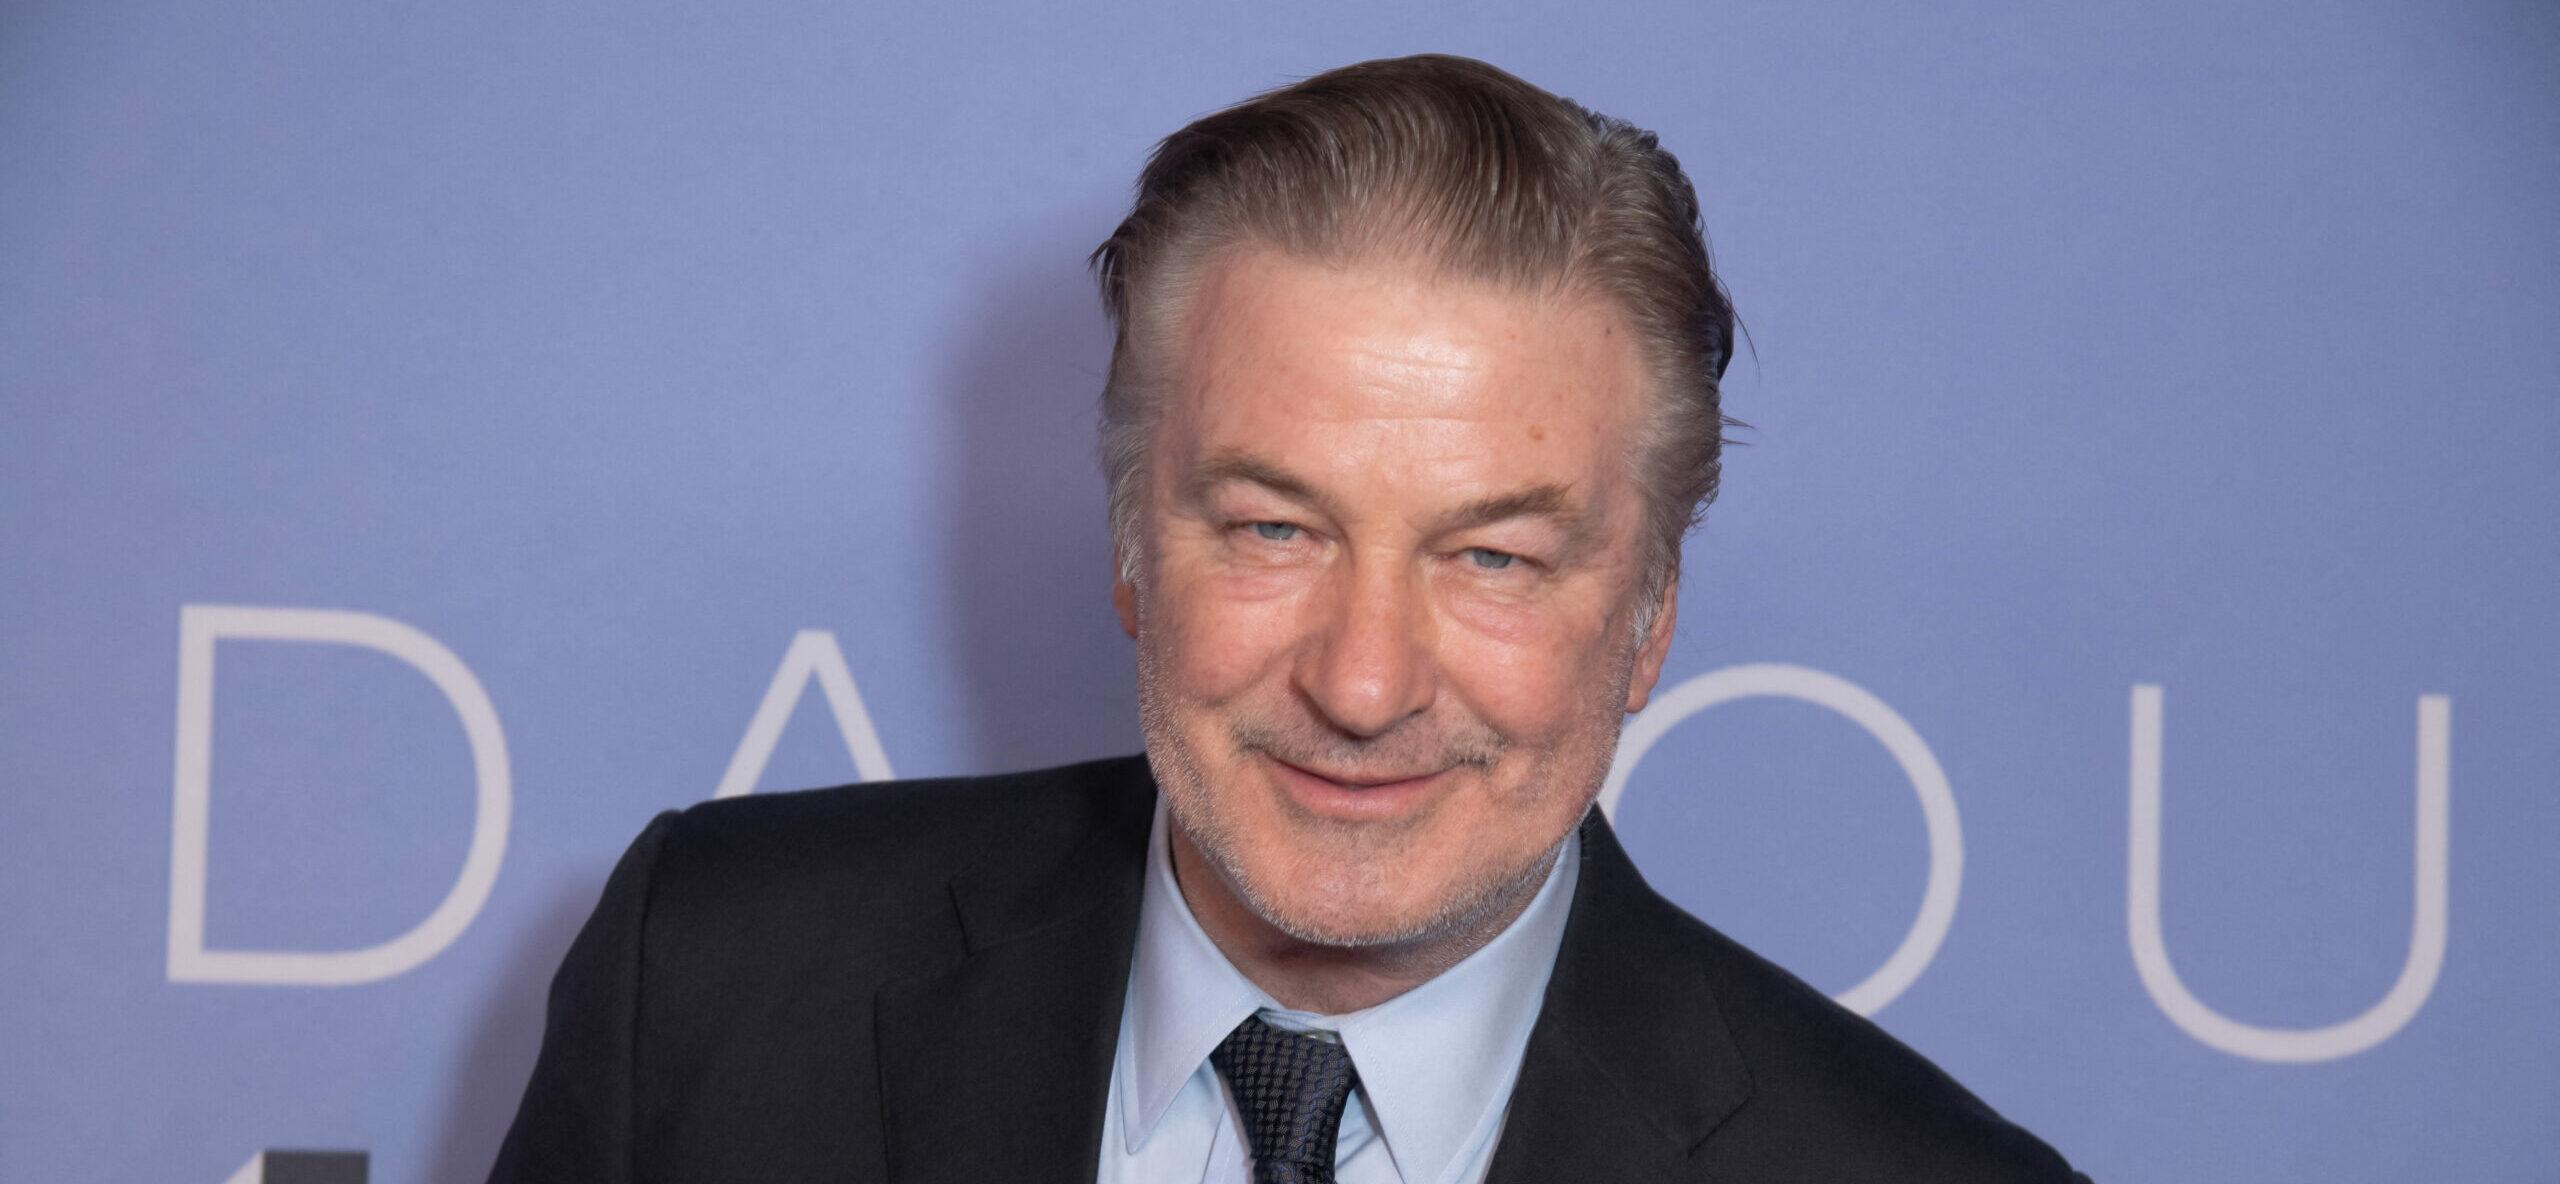 Alec Baldwin To Star In ‘Kent State’ Following ‘Rust’ Incident